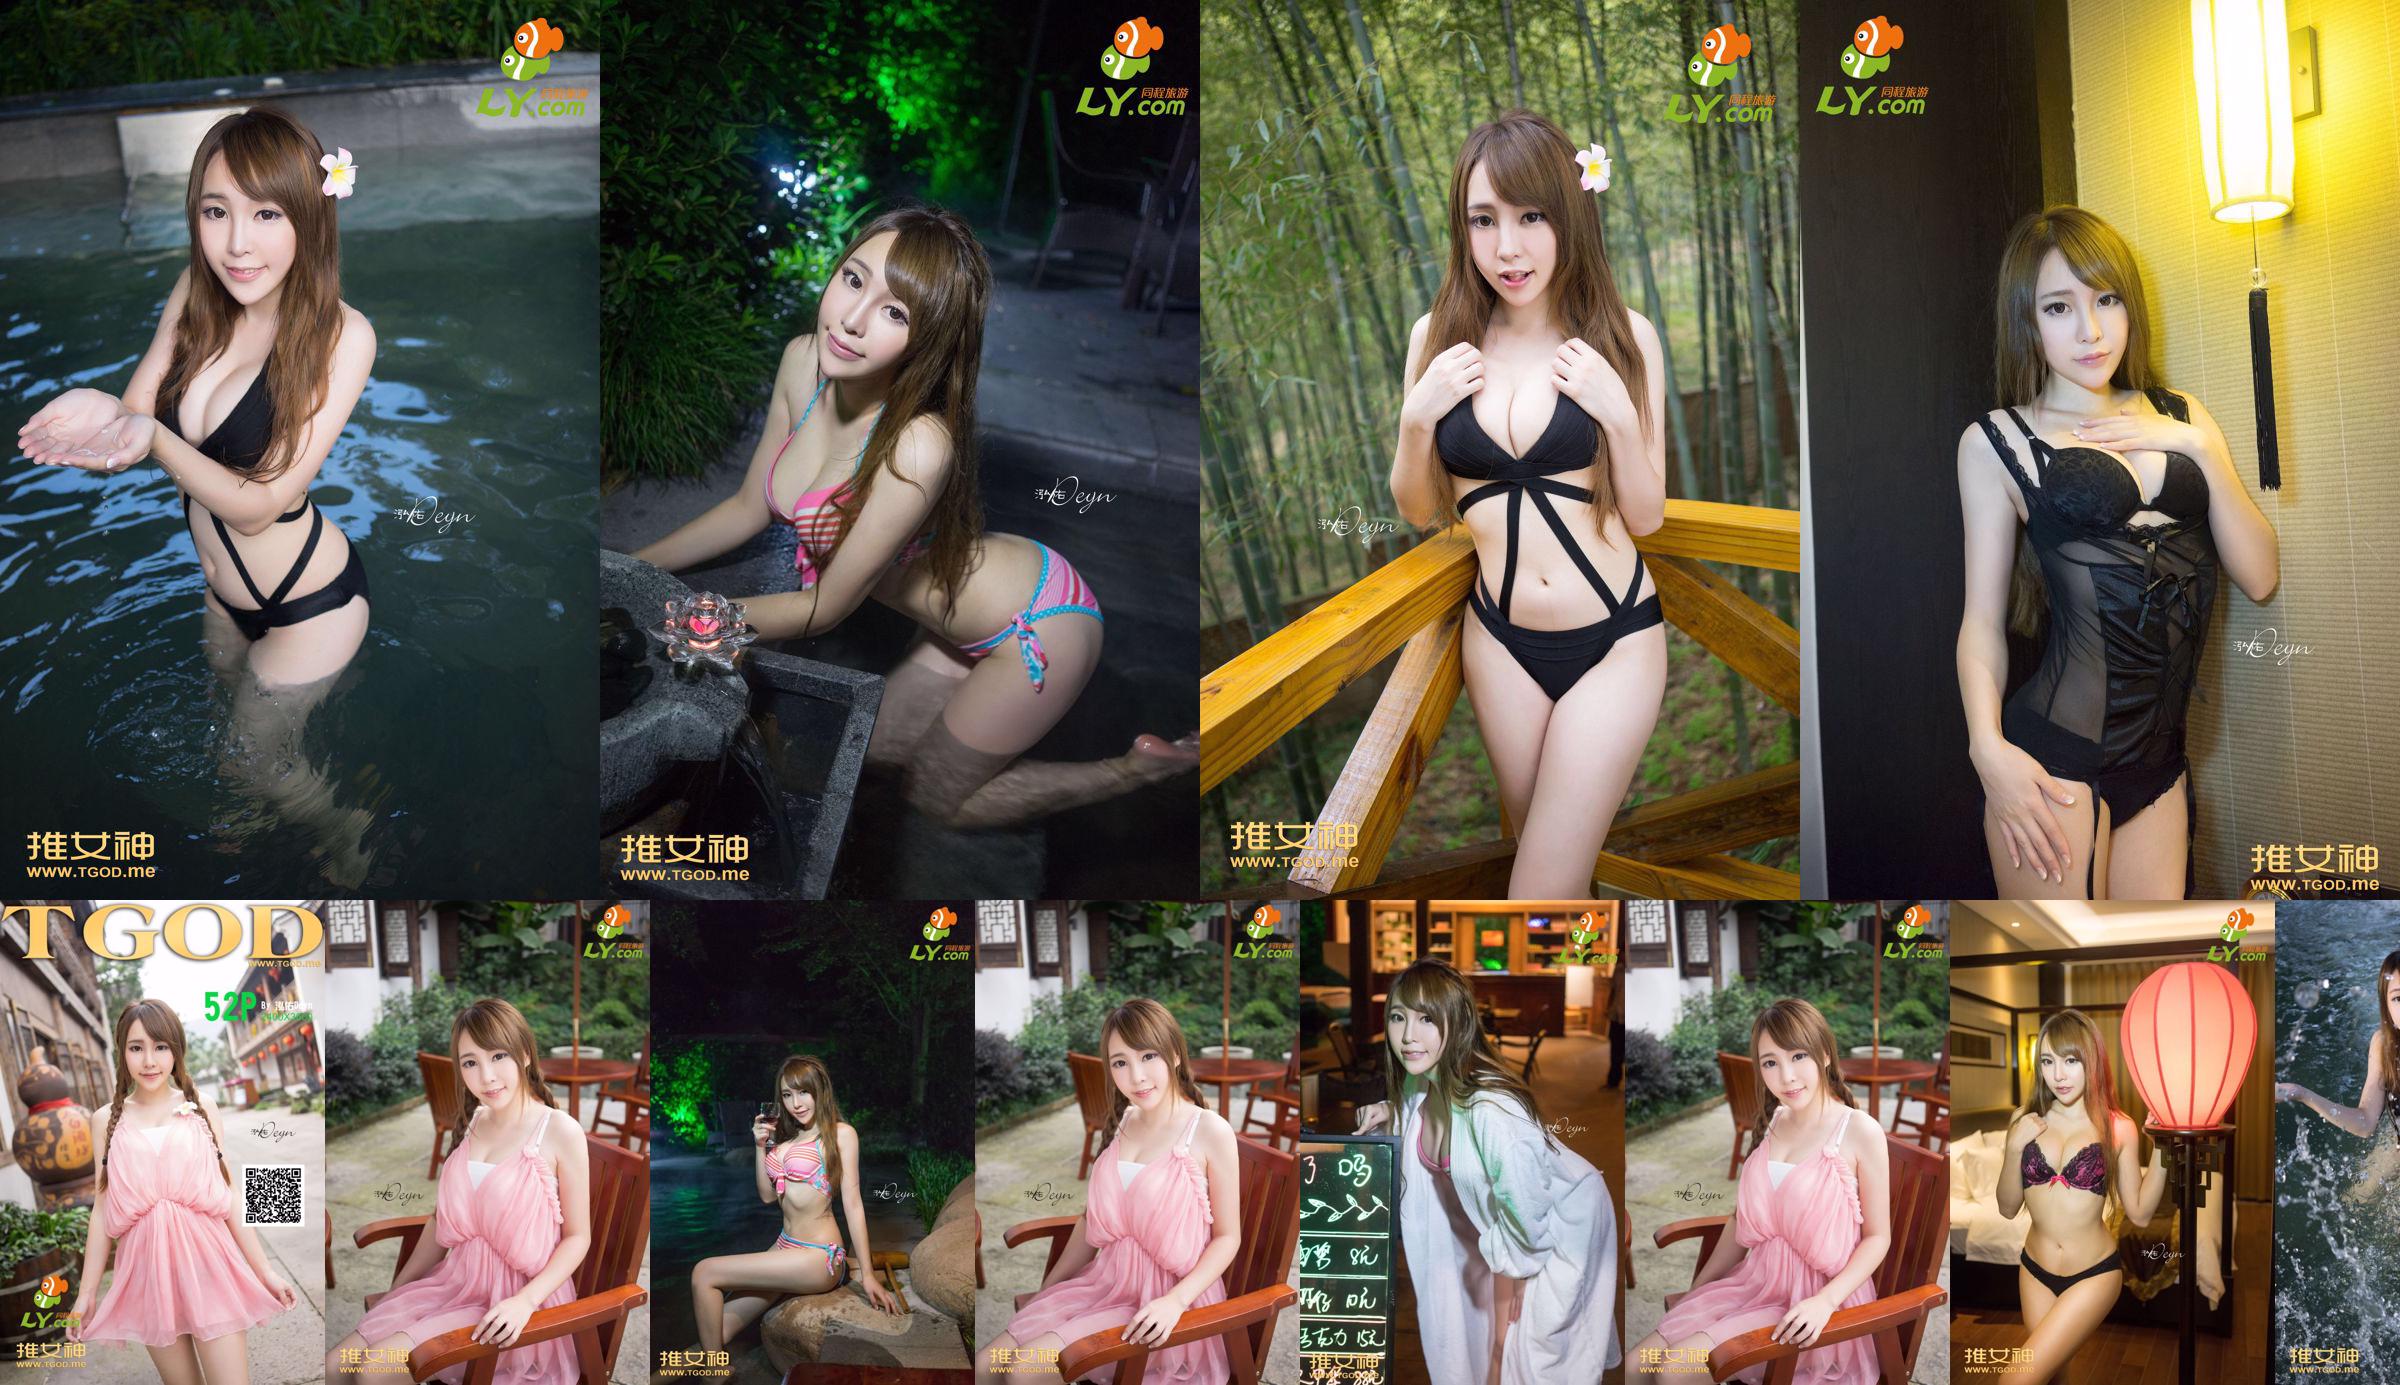 Huang Mengxian "Where Is the Goddess Going Issue 7" [TGOD Push Goddess] No.743768 Page 1